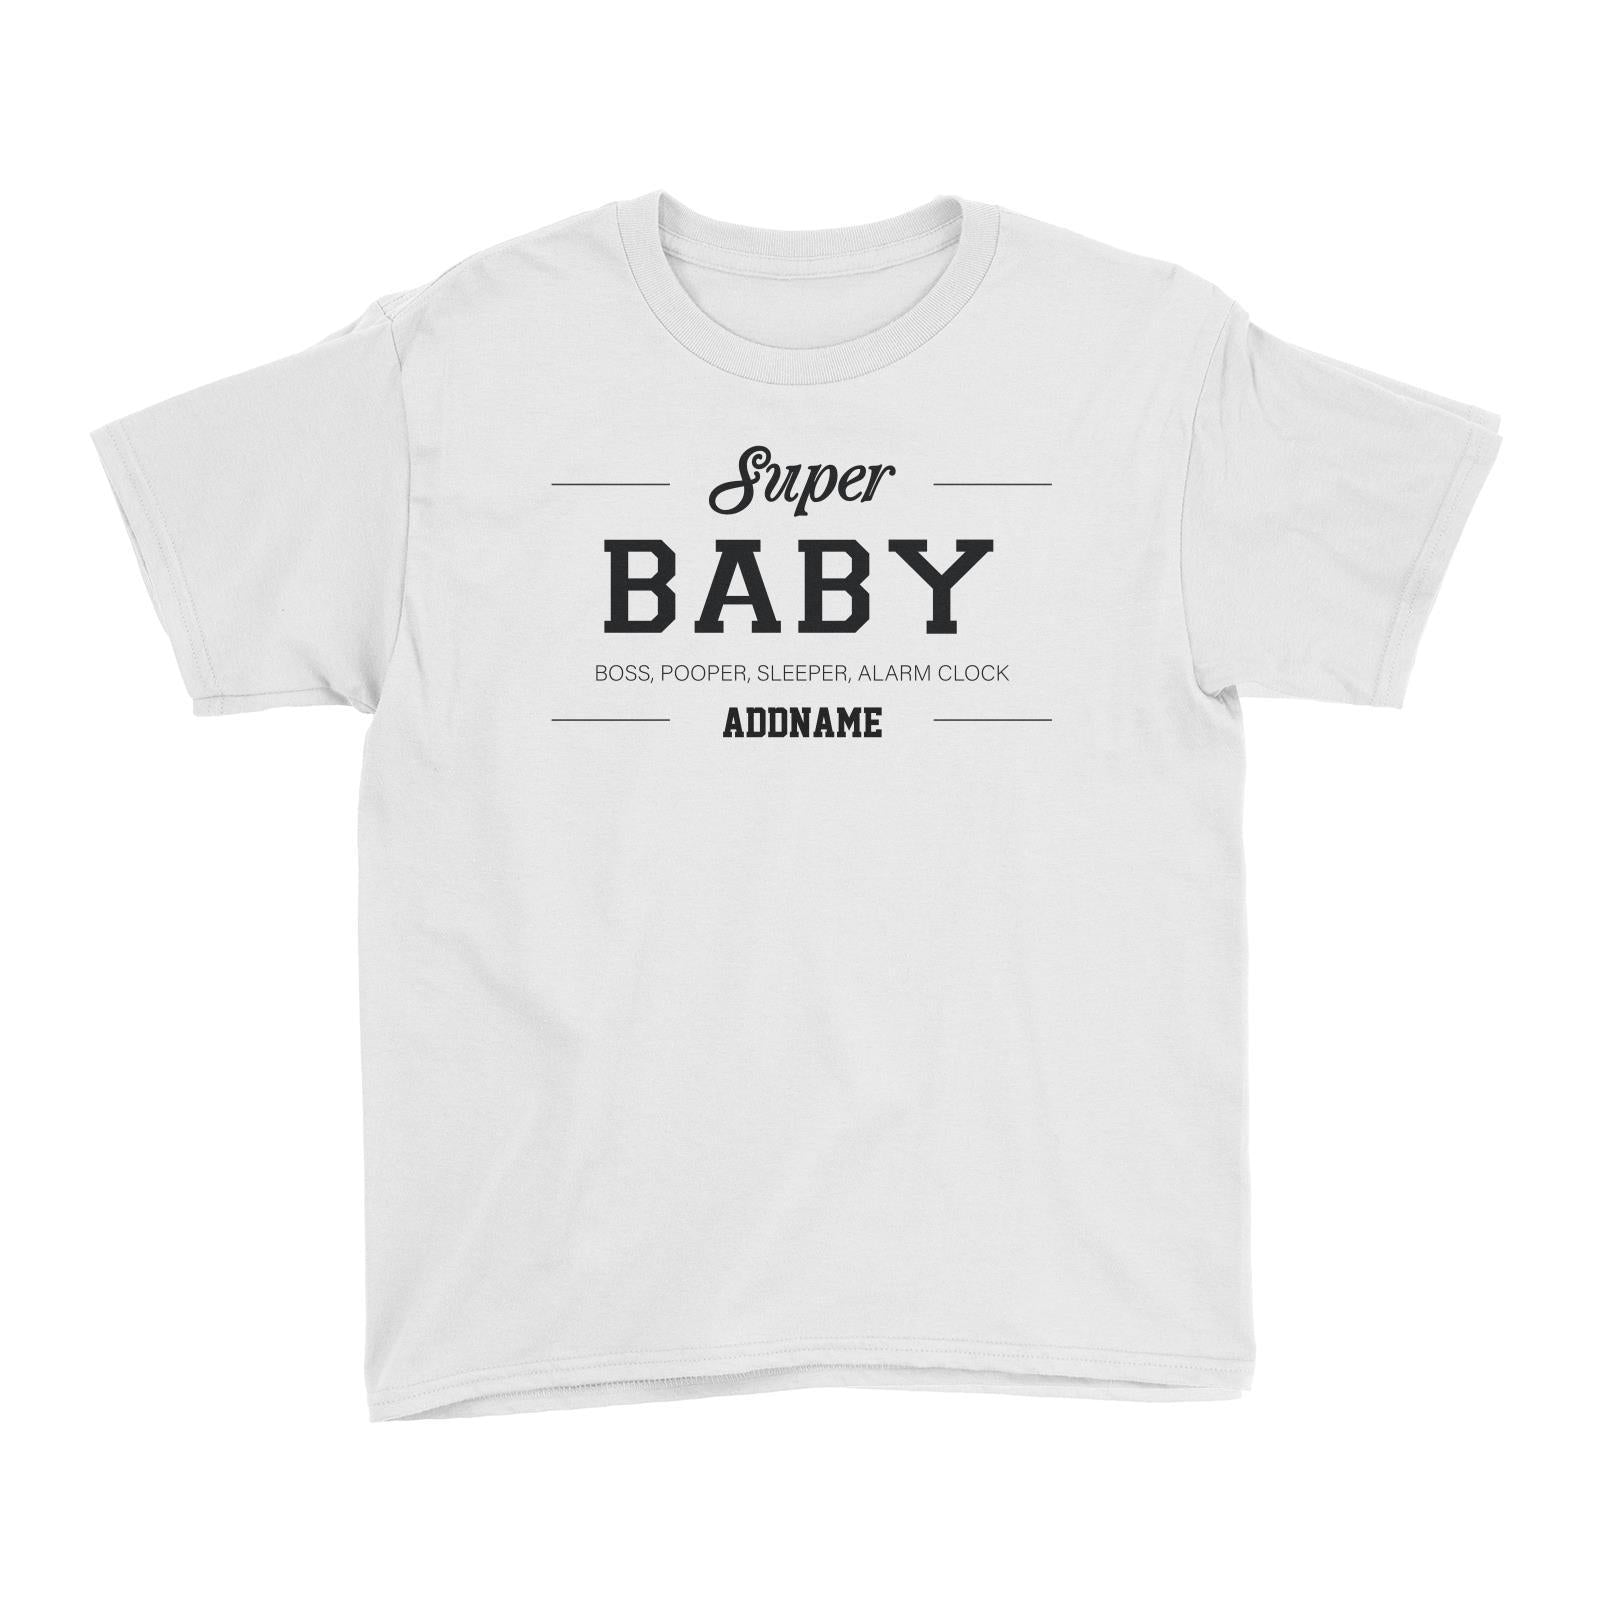 Super Definition Family Super Baby Addname Kid's T-Shirt